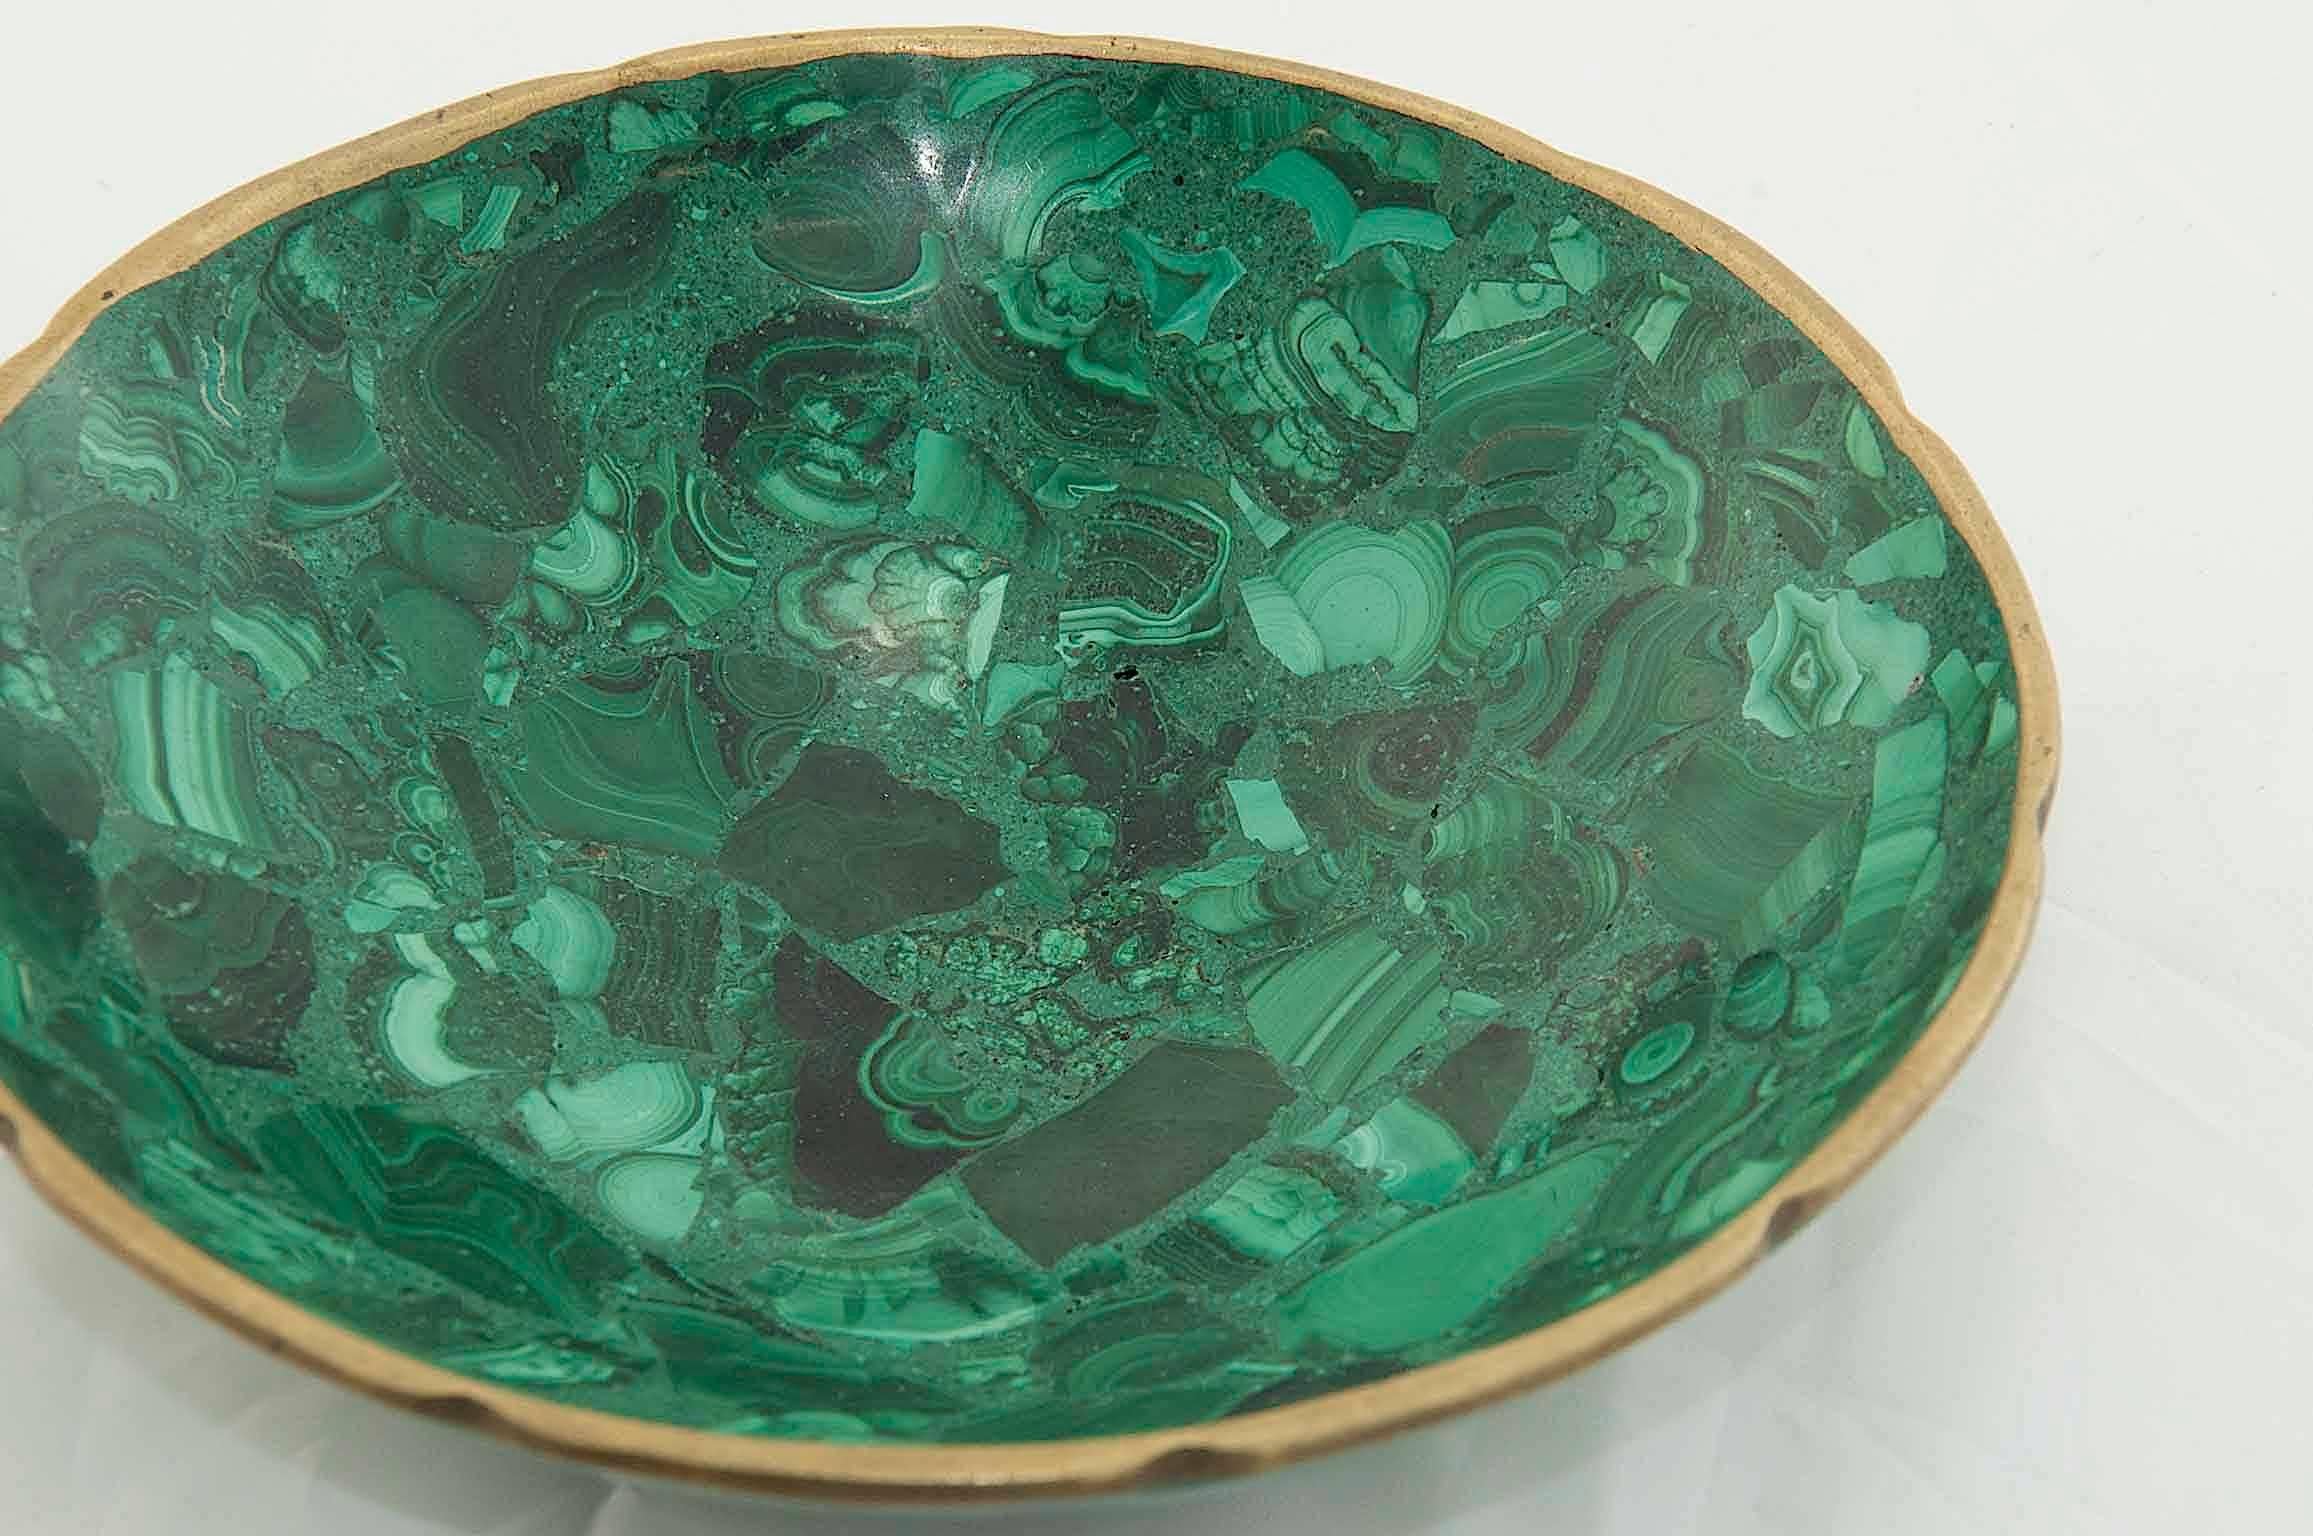 Bowl in Malachite, this decorative object, can be used too as an Ashtray, Vide Poche.
20th century.